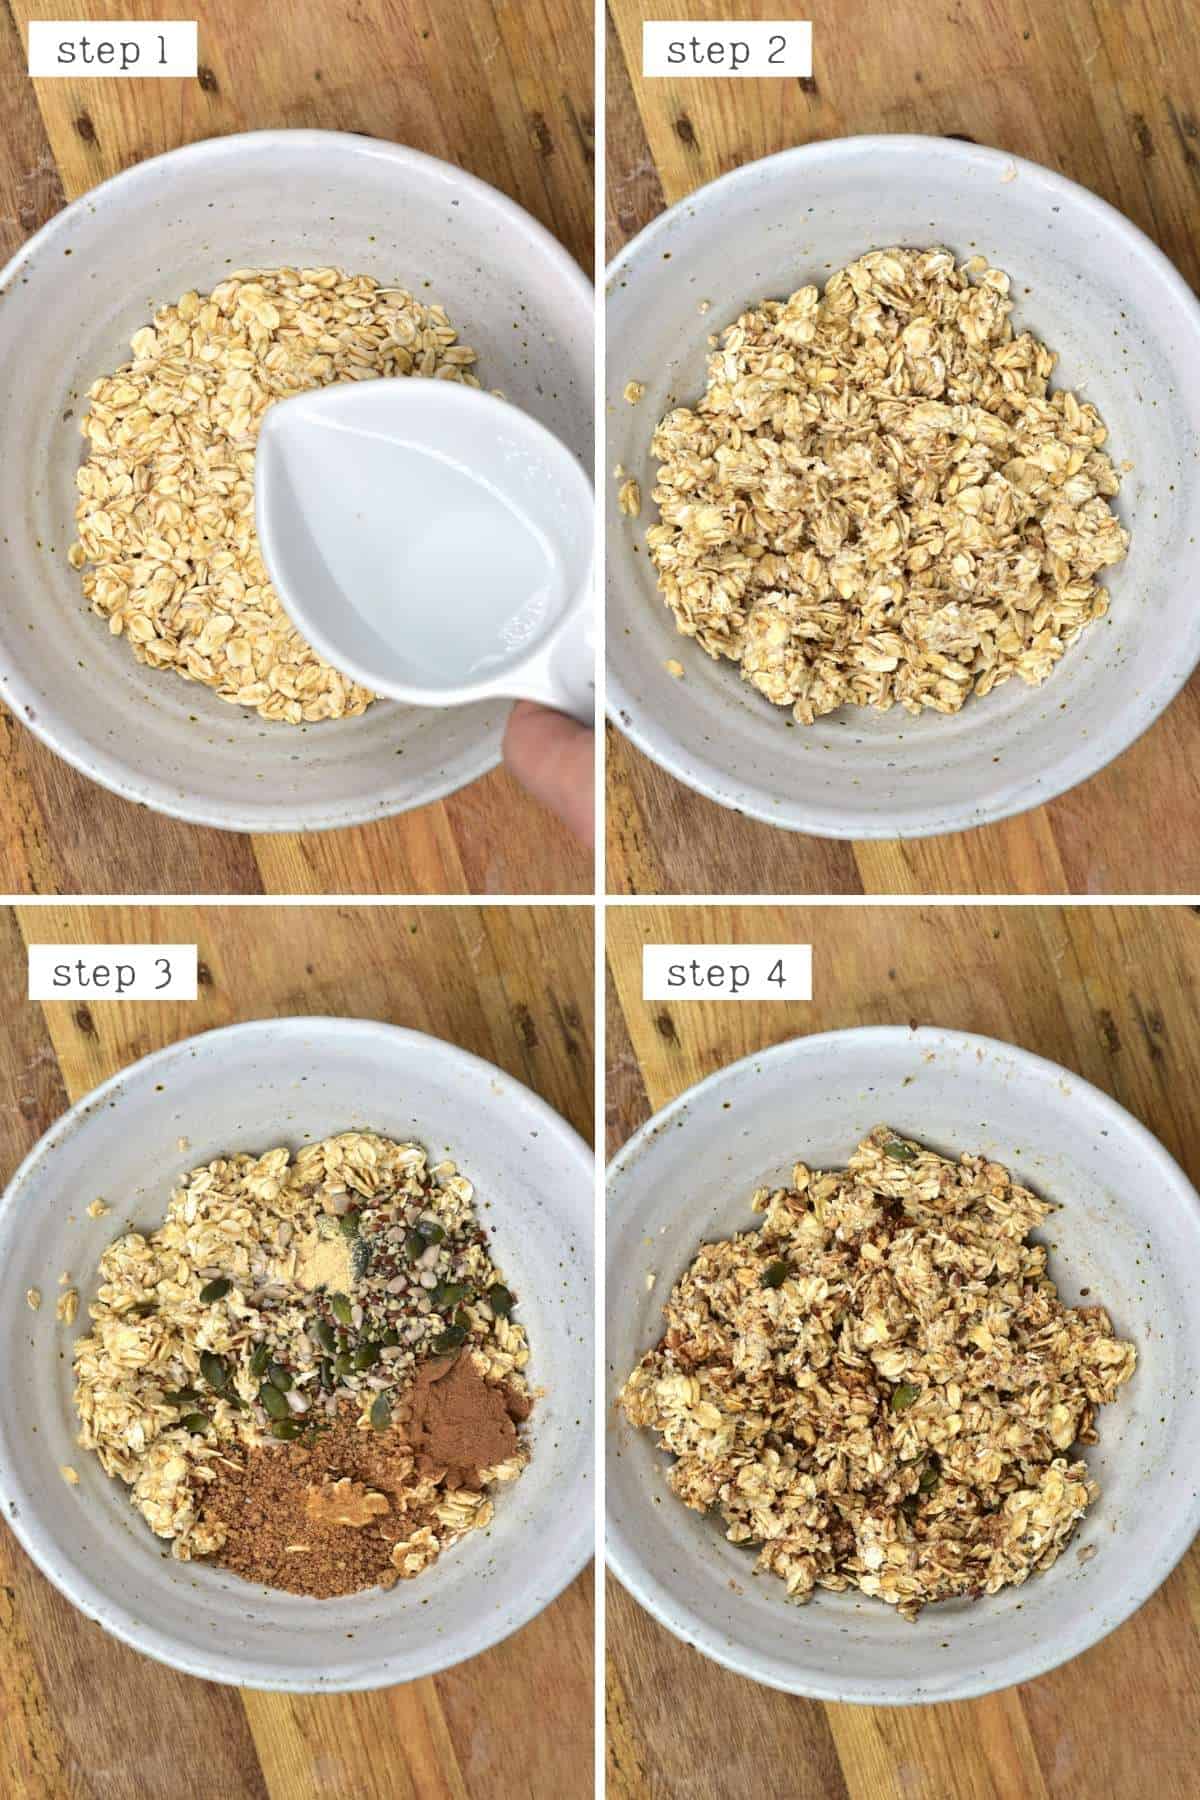 Steps for mixing oats with water and spices